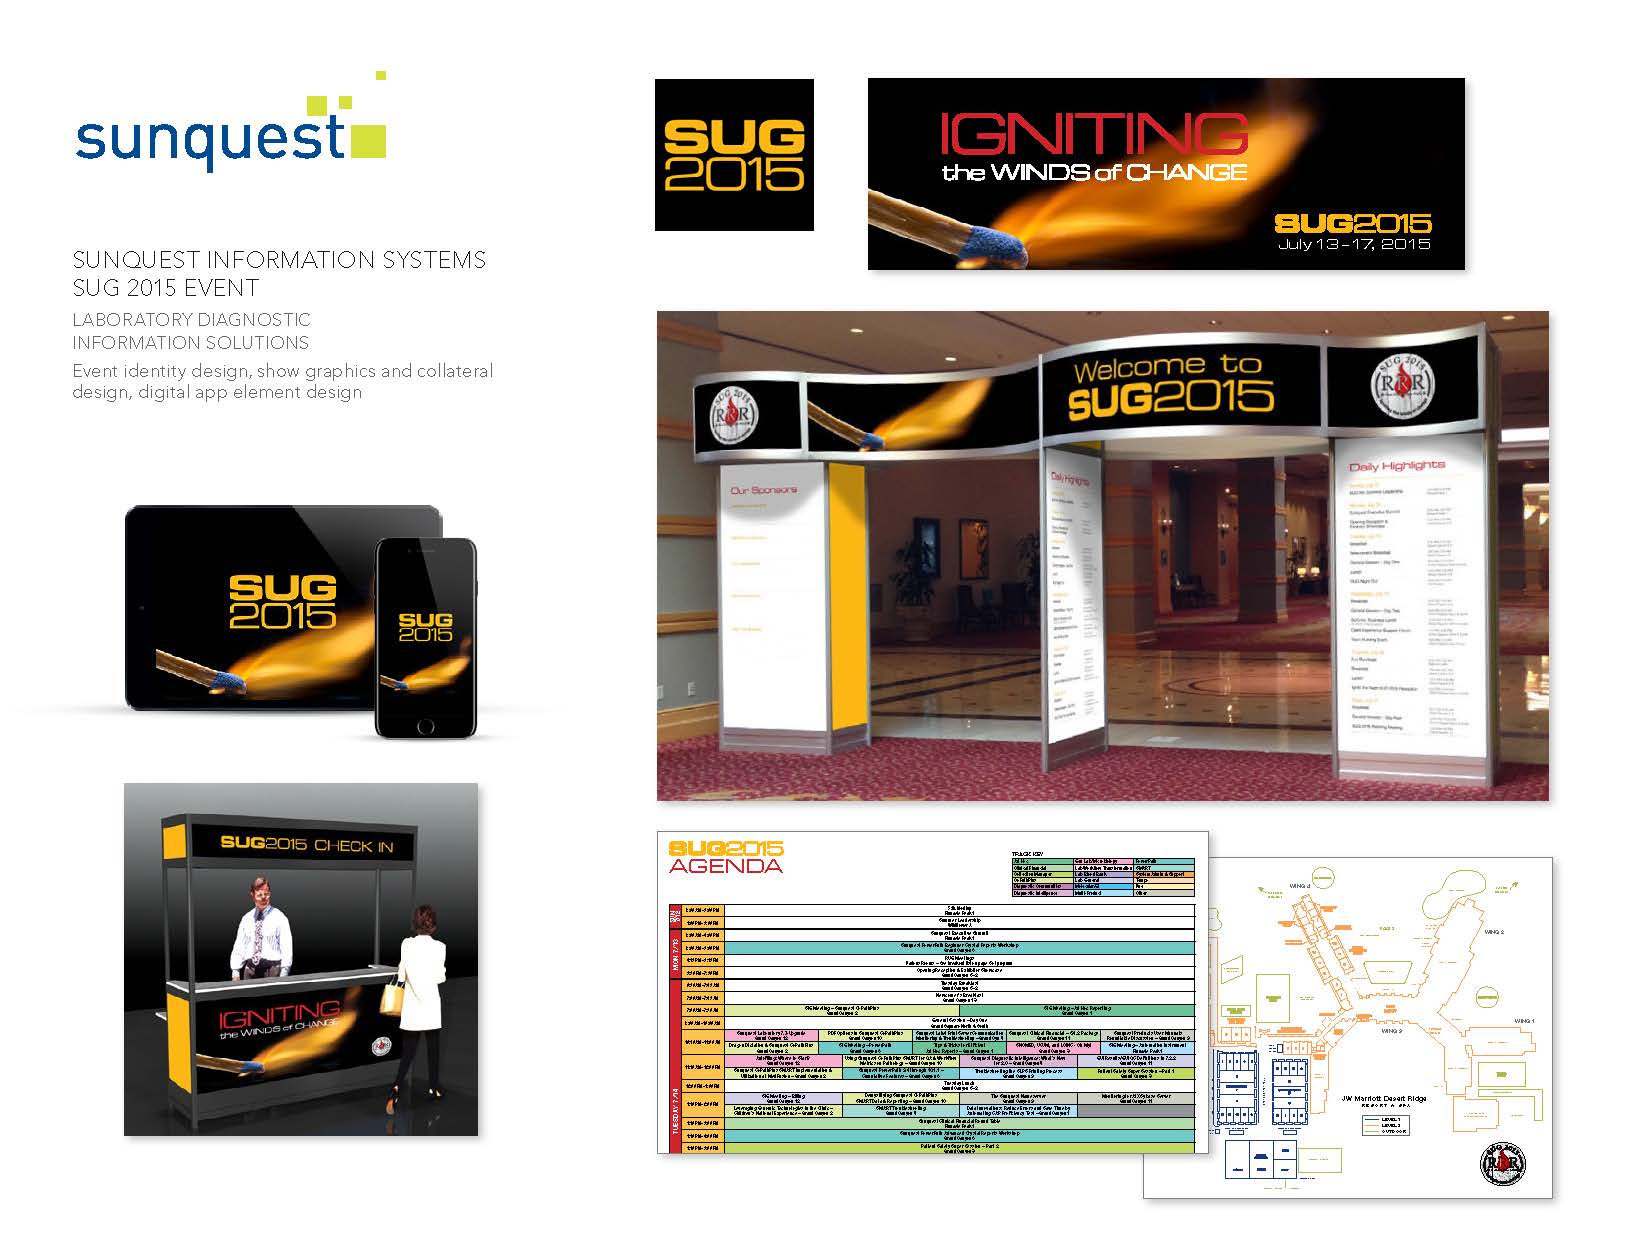 sunquest-information-systems-dauntless-creative